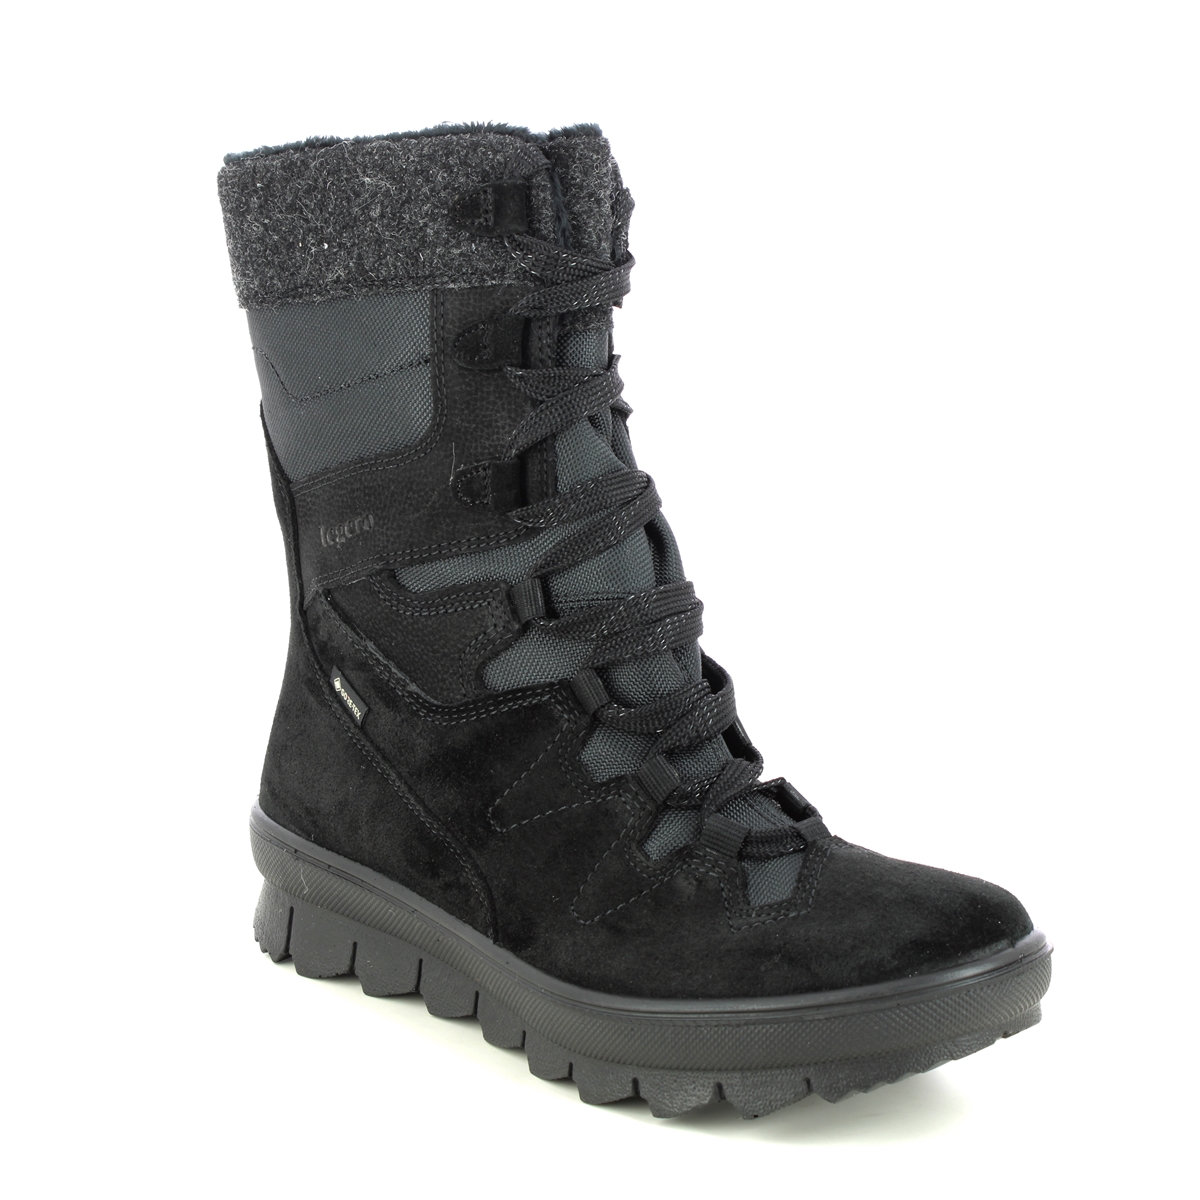 Legero Novara Mid Gtx Black Suede Womens Mid Calf Boots 2000283-0000 in a Plain Leather in Size 4.5